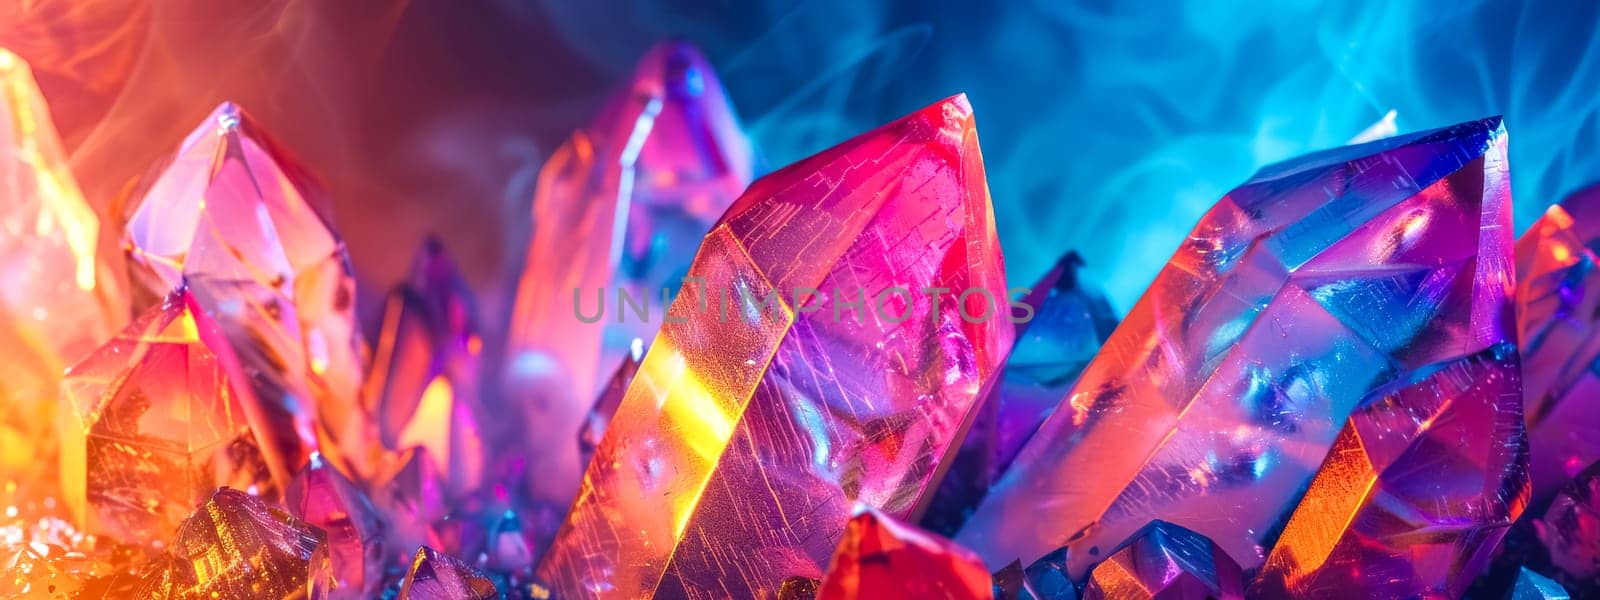 Vivid crystal formation background with colorful lighting by Edophoto